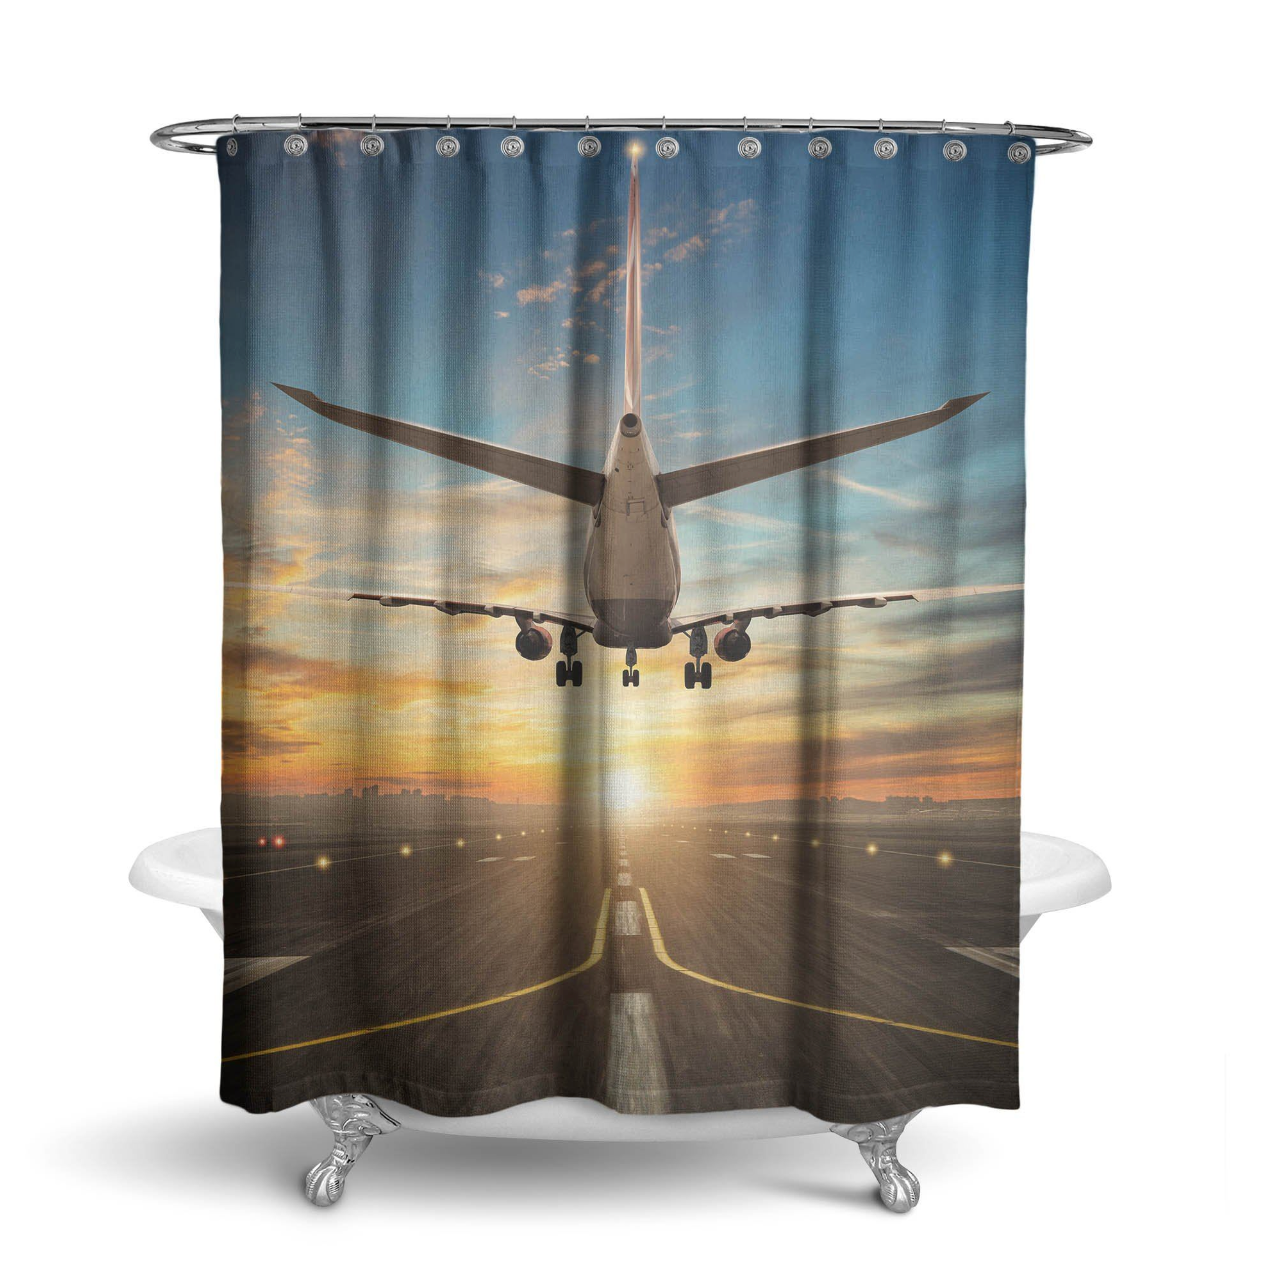 Airplane over Runway Towards the Sunrise Printed Shower Curtains